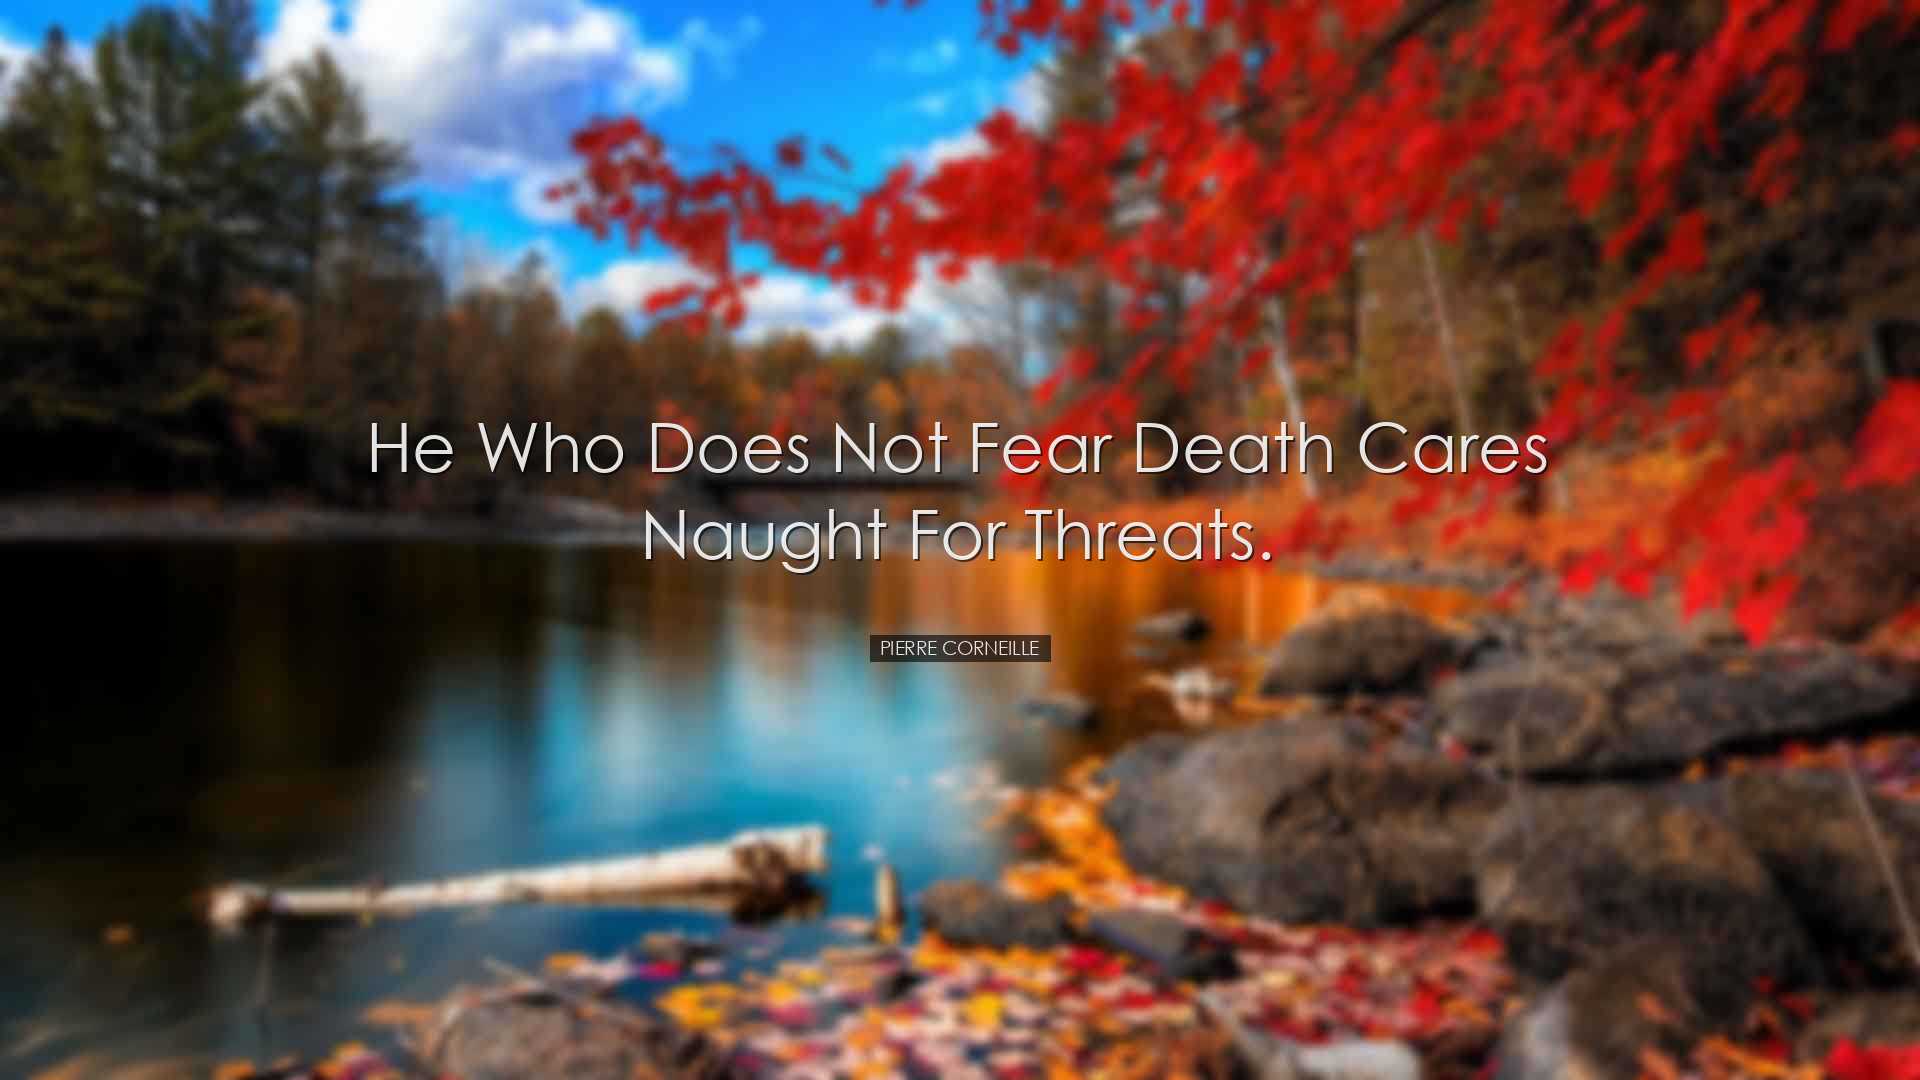 He who does not fear death cares naught for threats. - Pierre Corn